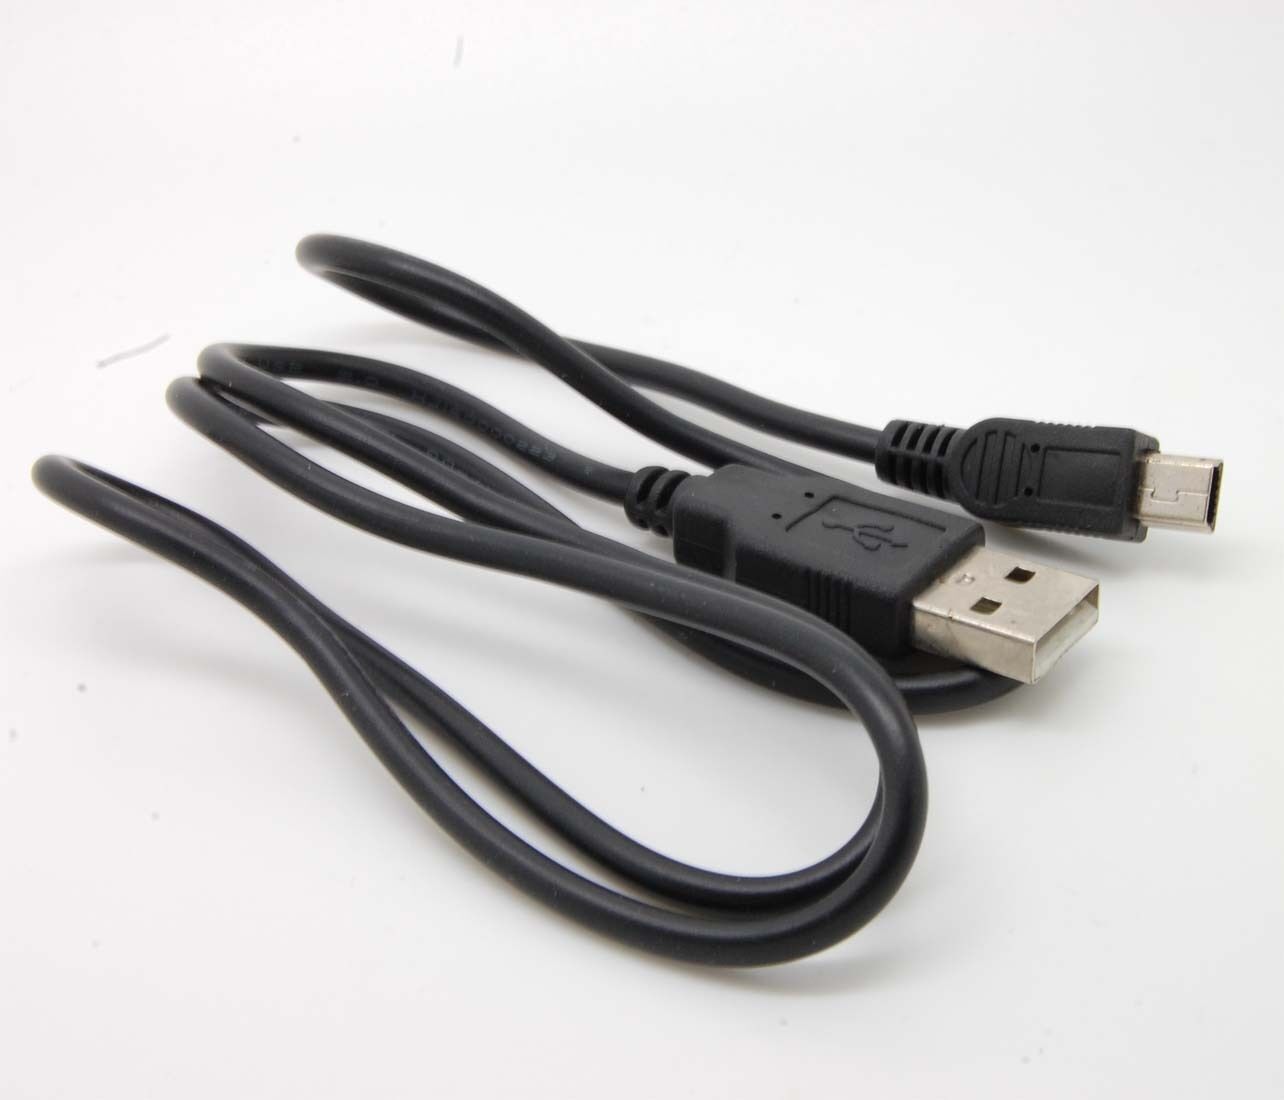 usb data cable for nikon Coolpix camera download picture to pc DD1 D100 DD1h D1x